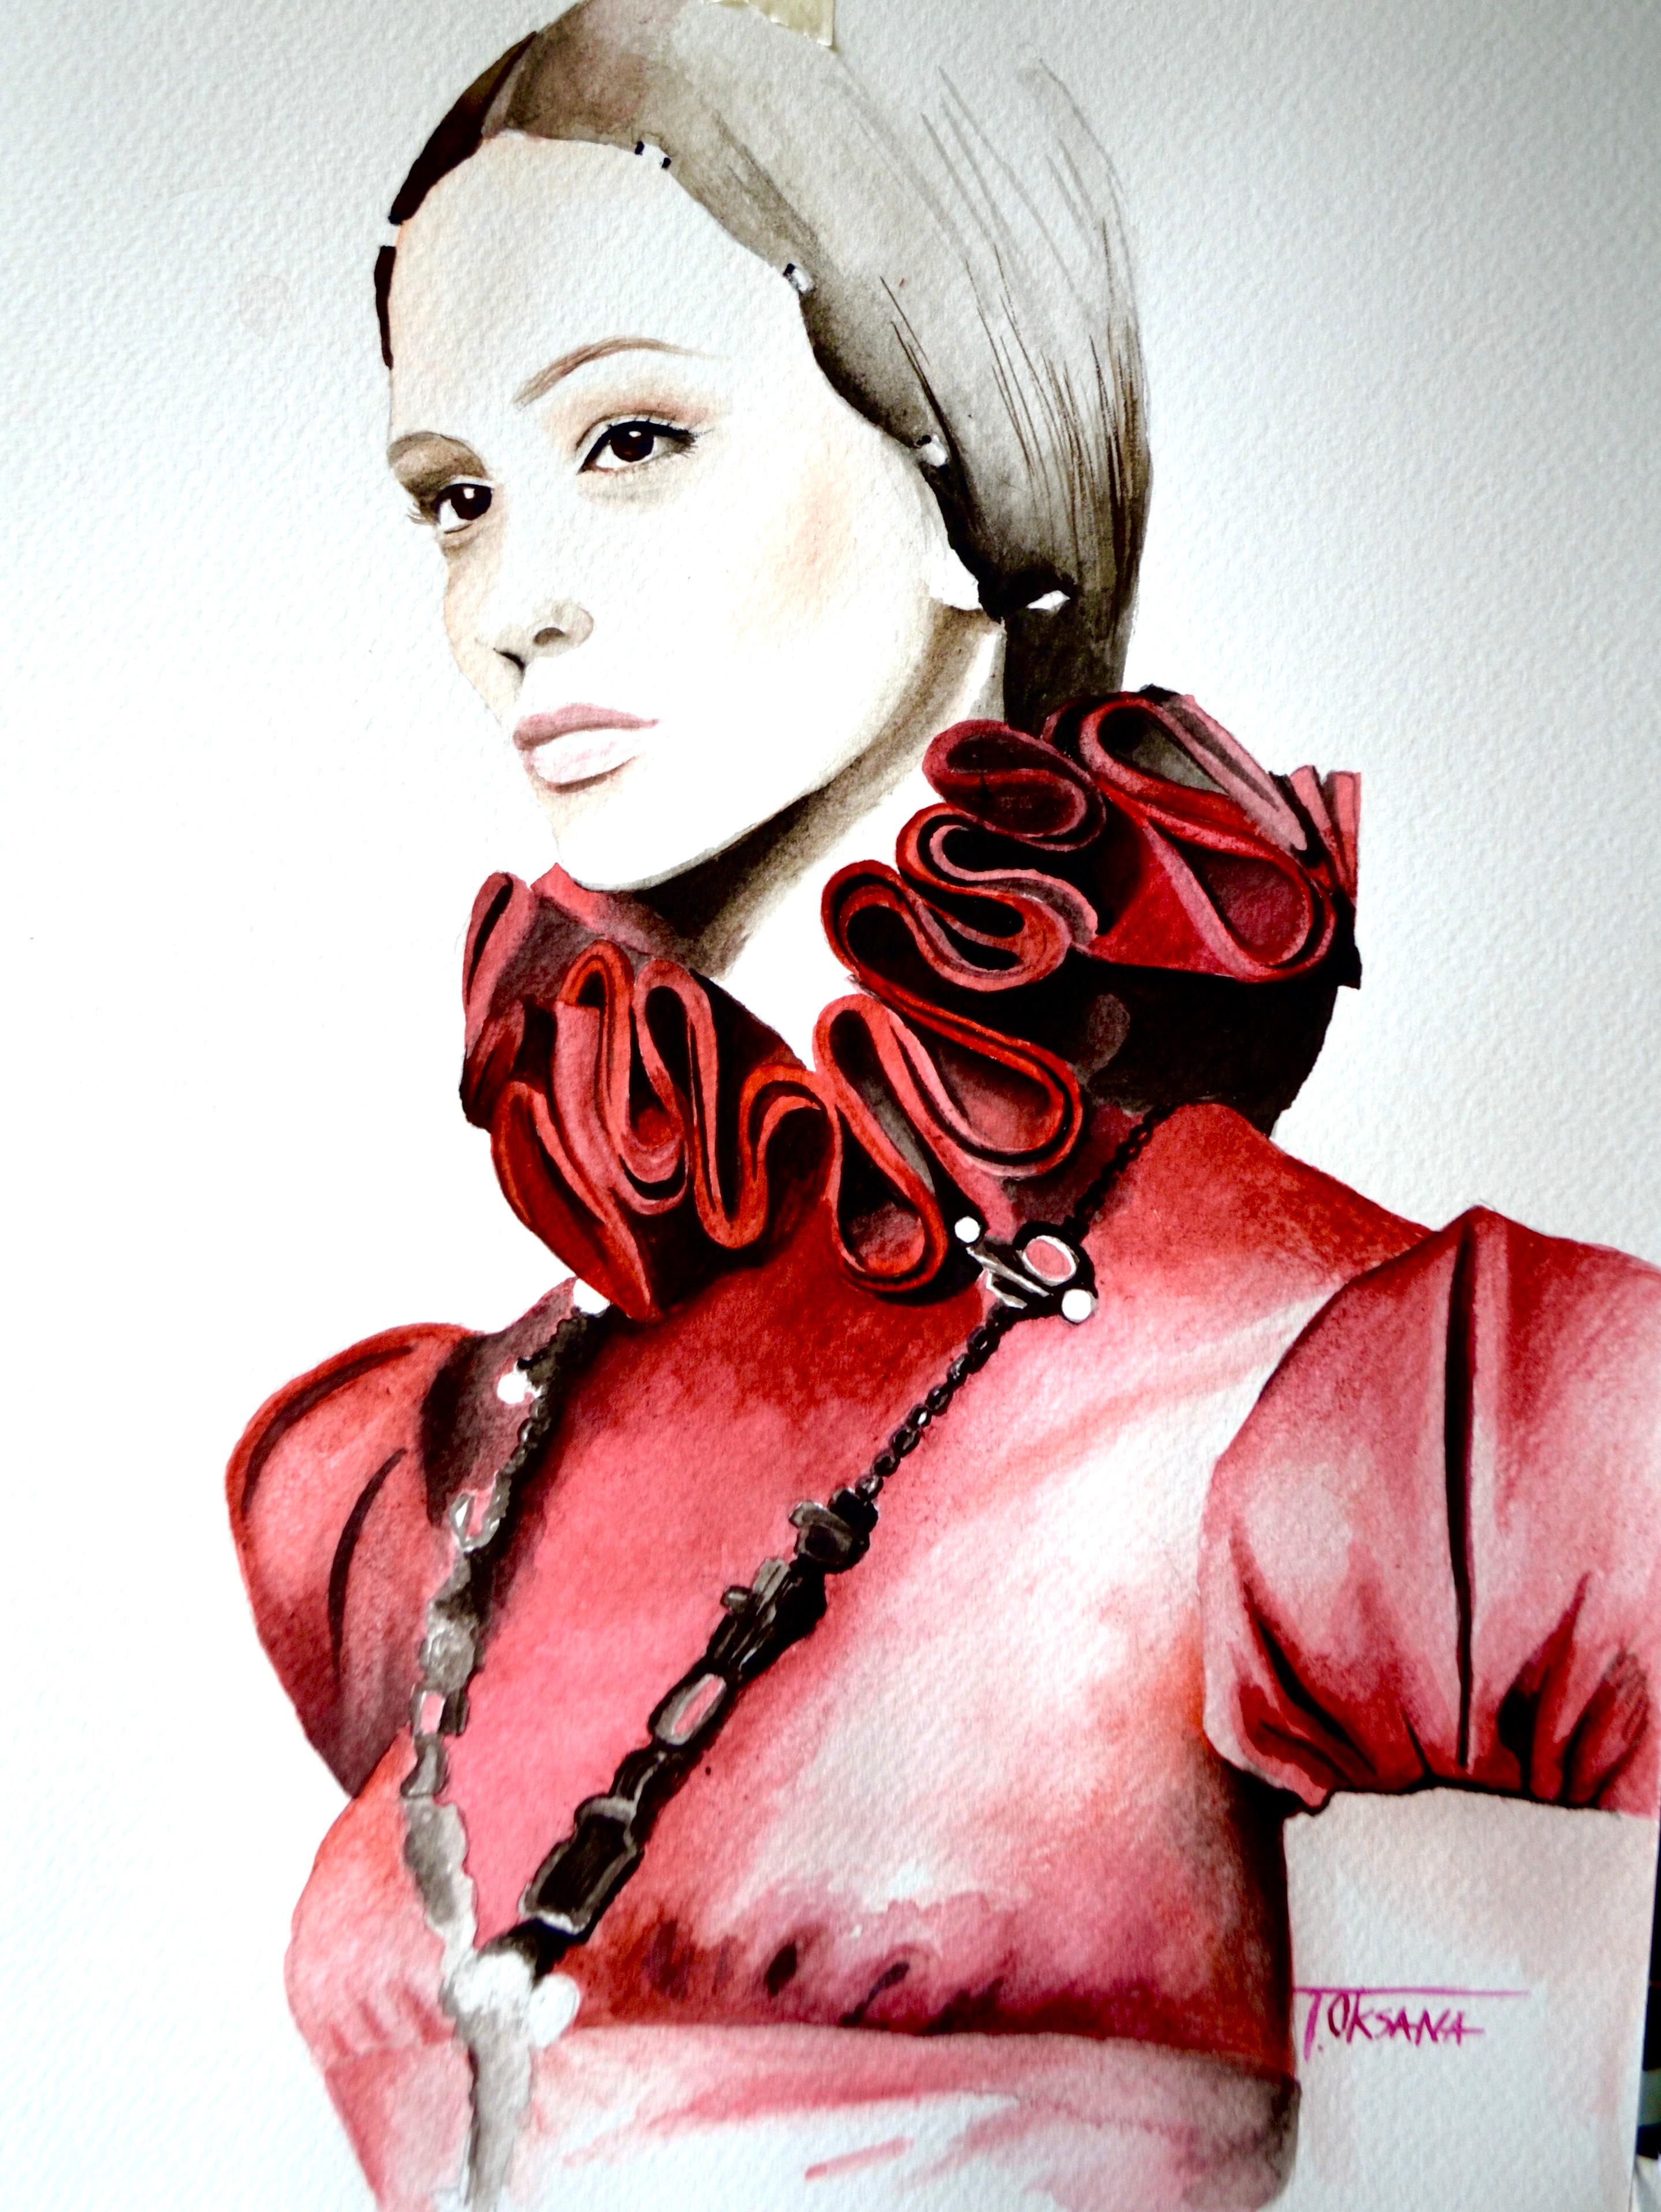 What is a fashion illustration called?